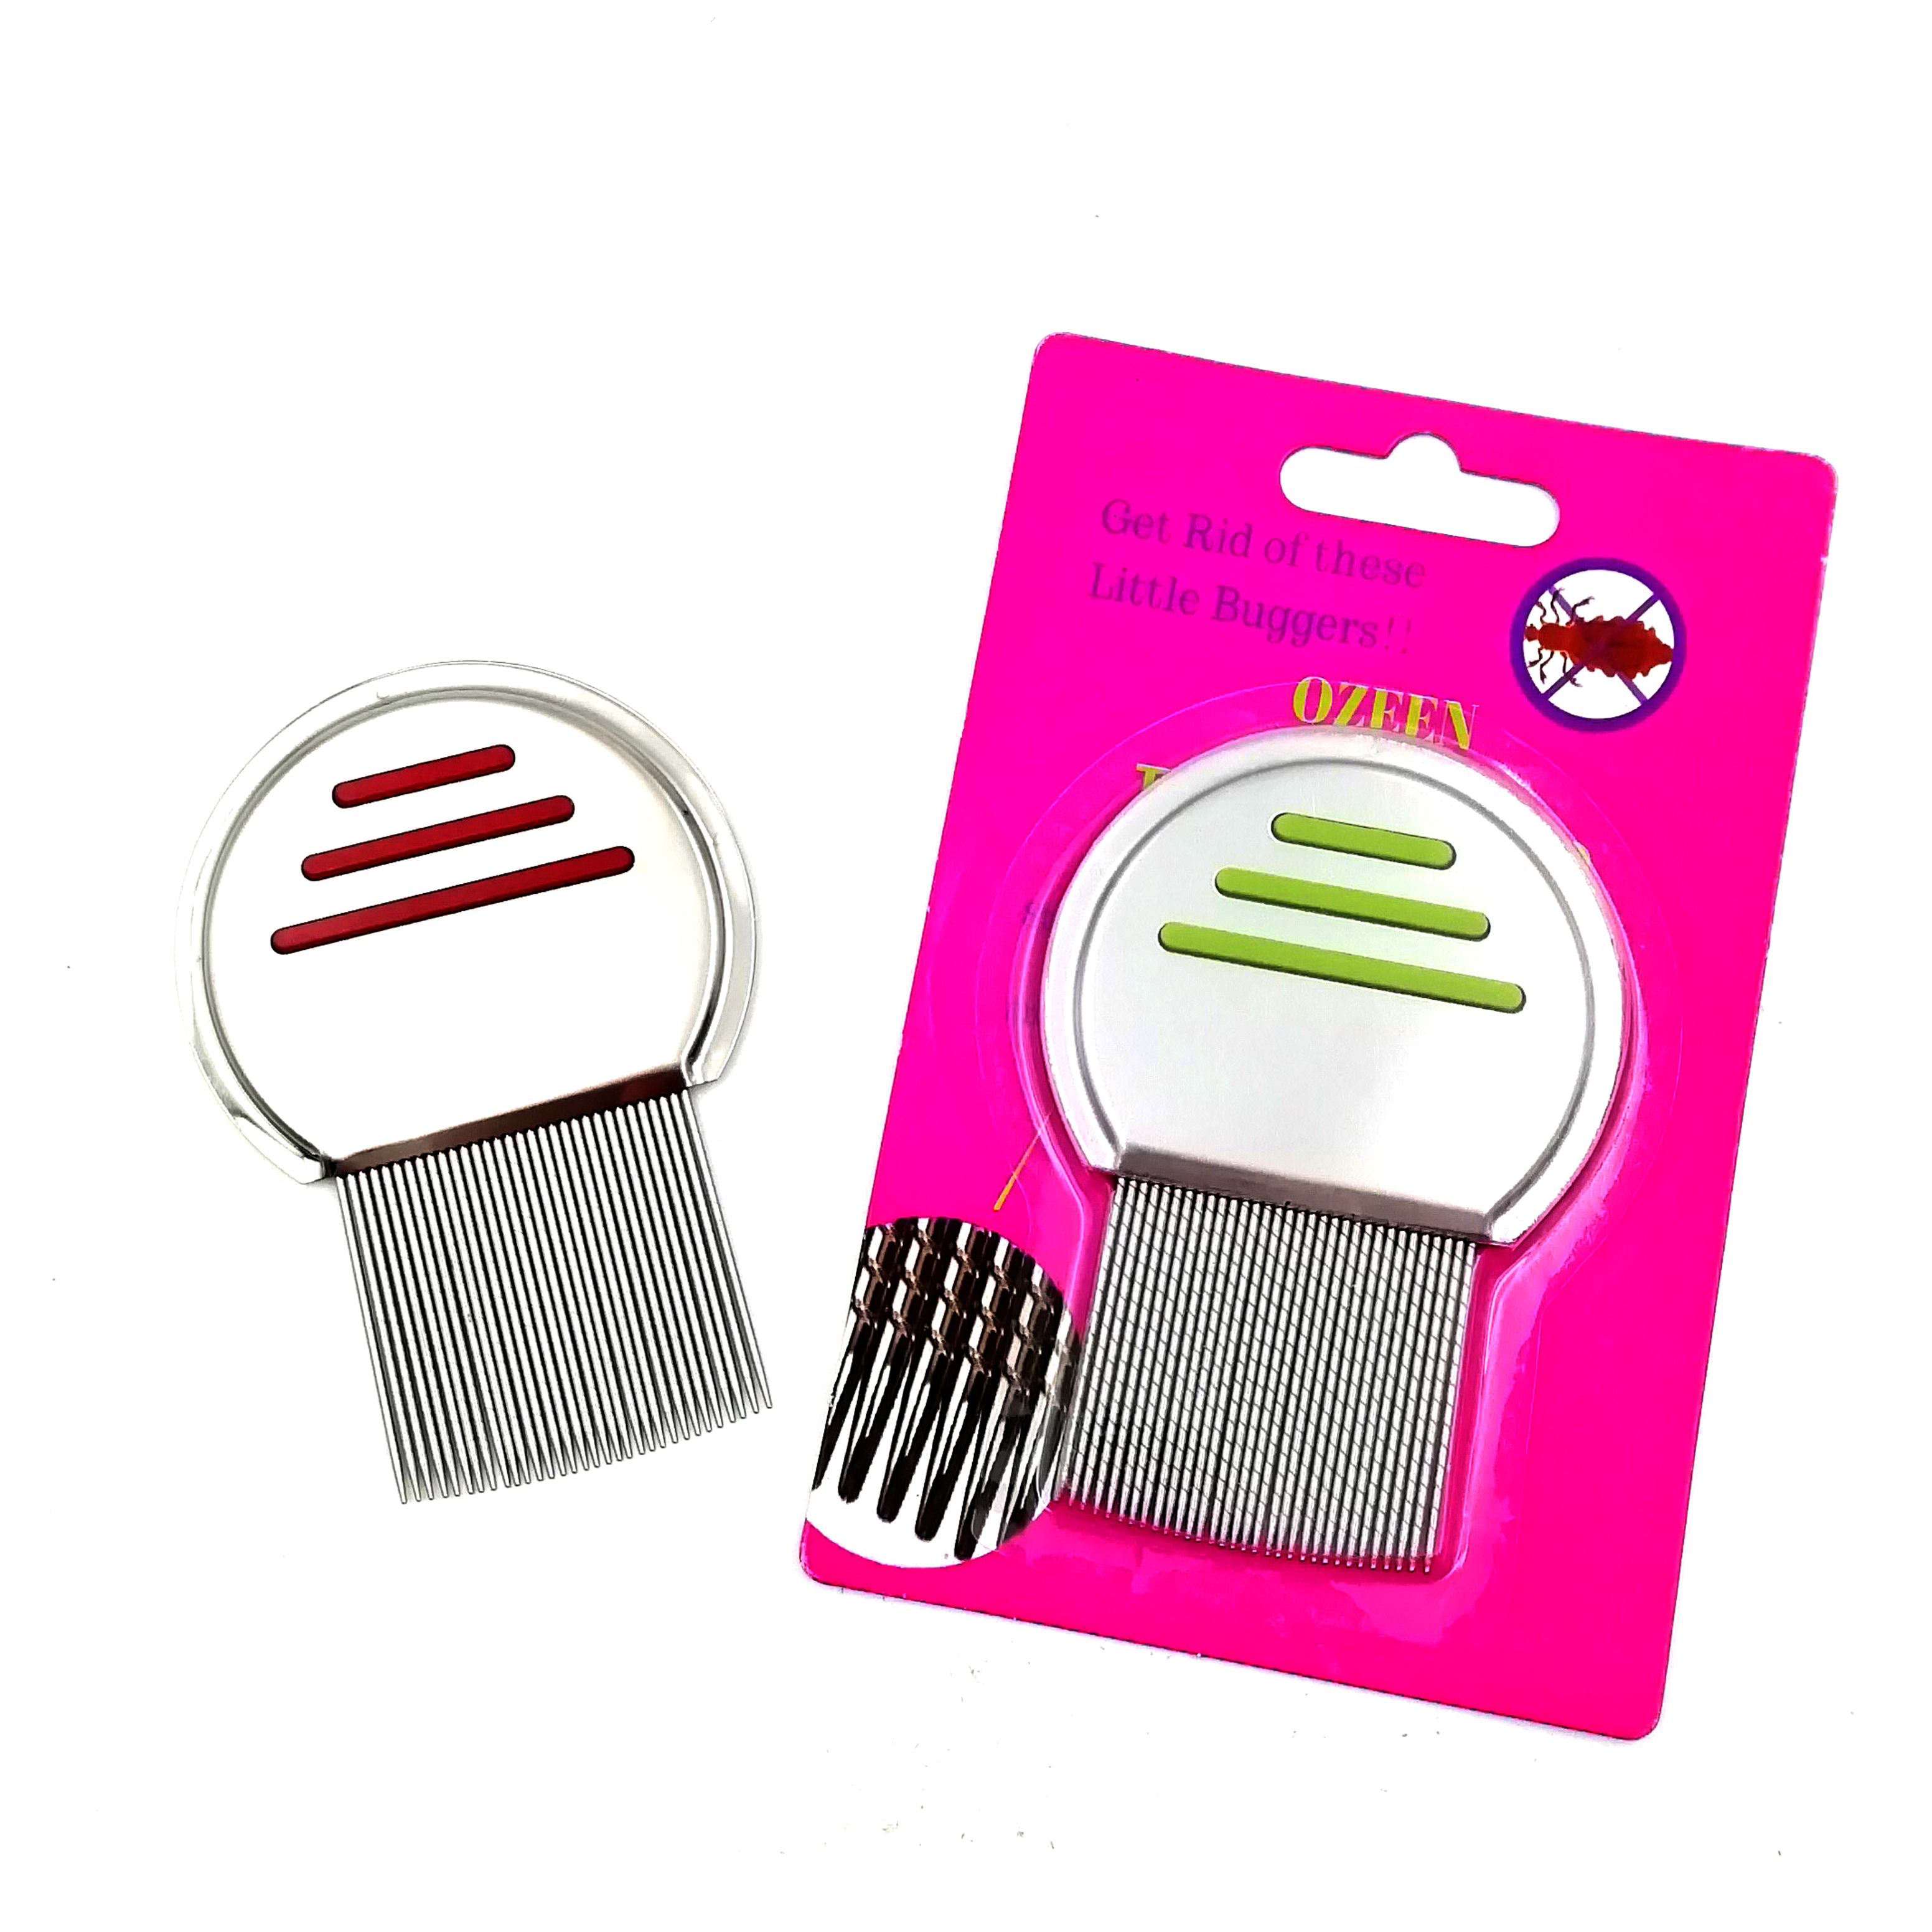 Stainless-steel-304-teeth-nit-lice-comb